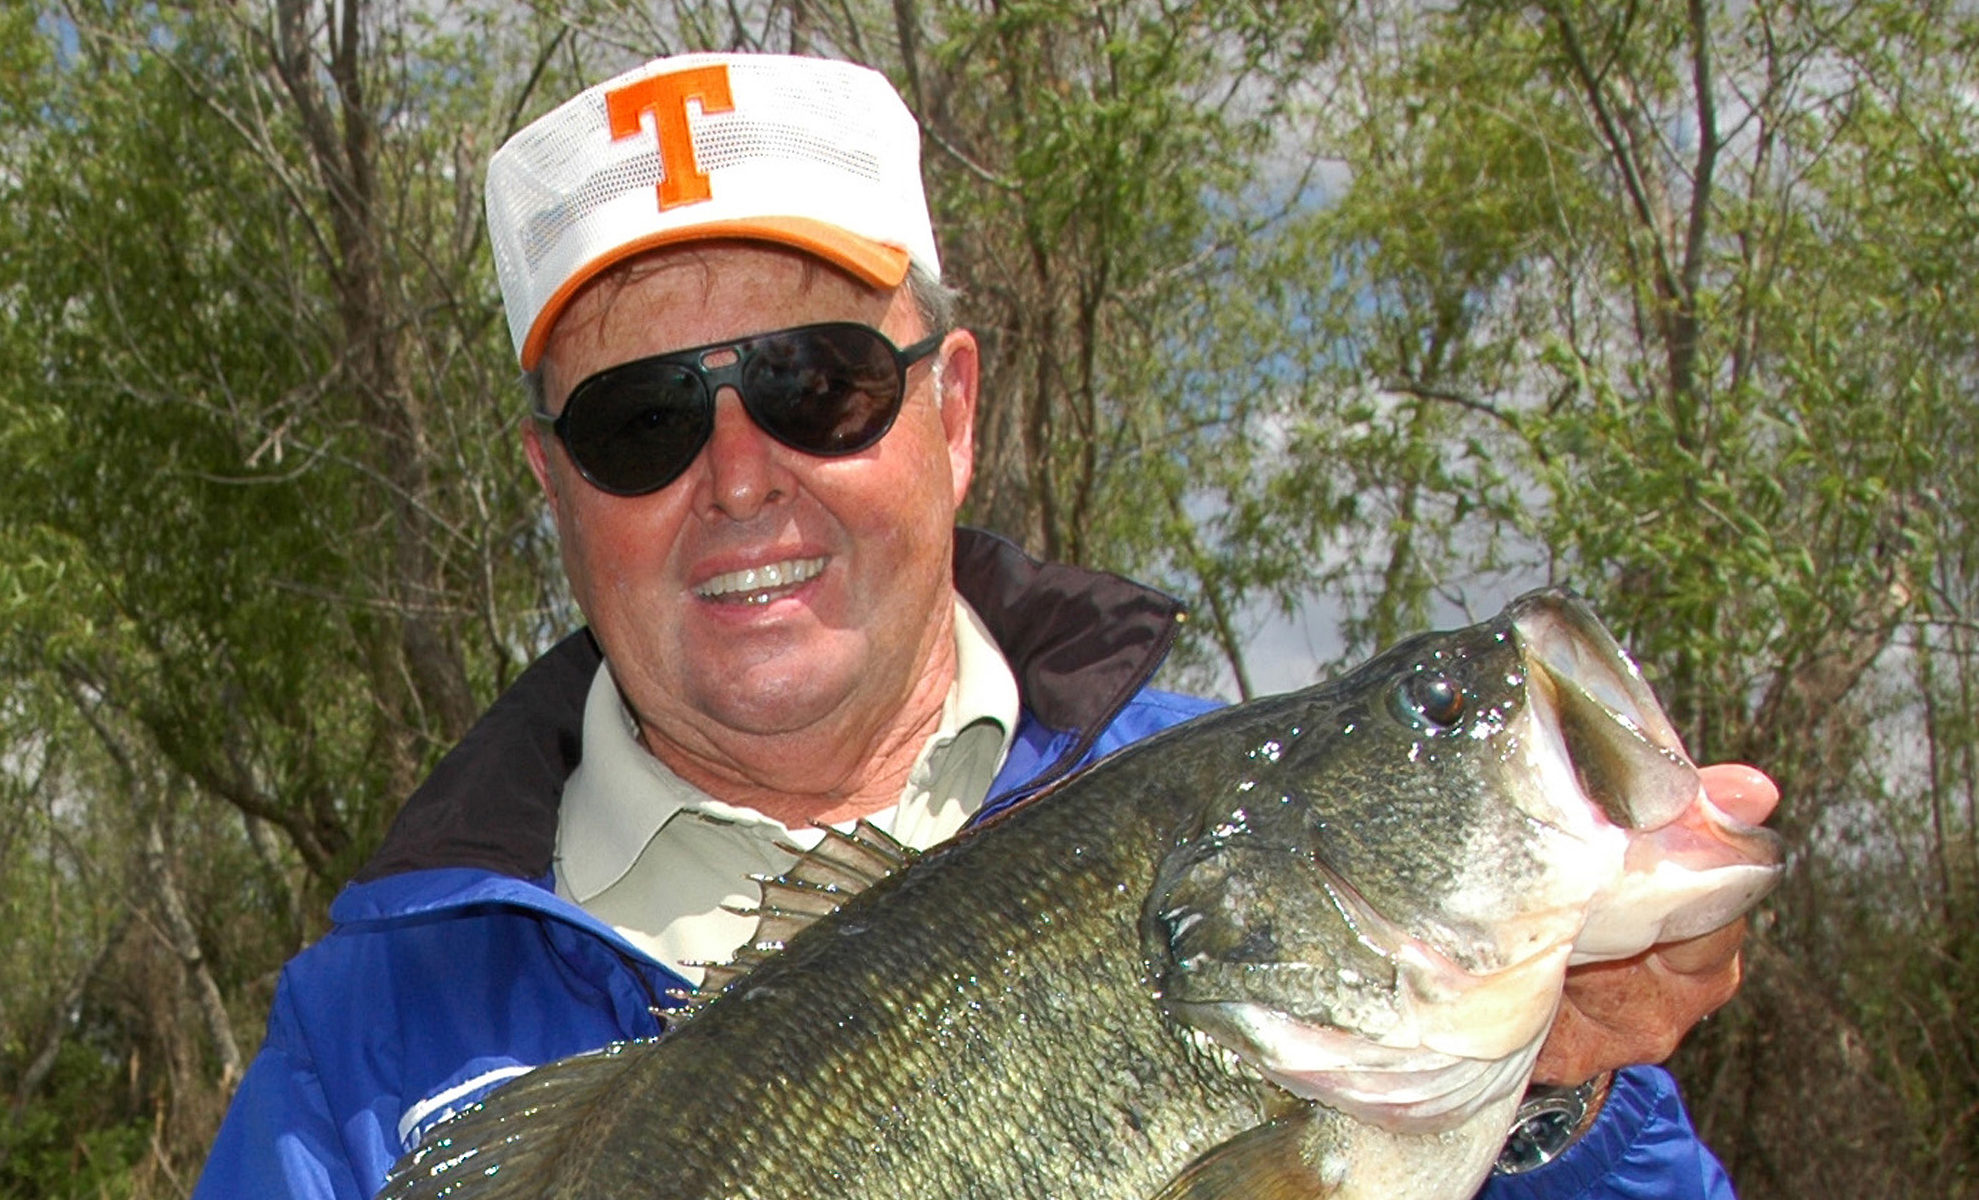 Professional fishing legend Bill Dance receives honorary doctorate